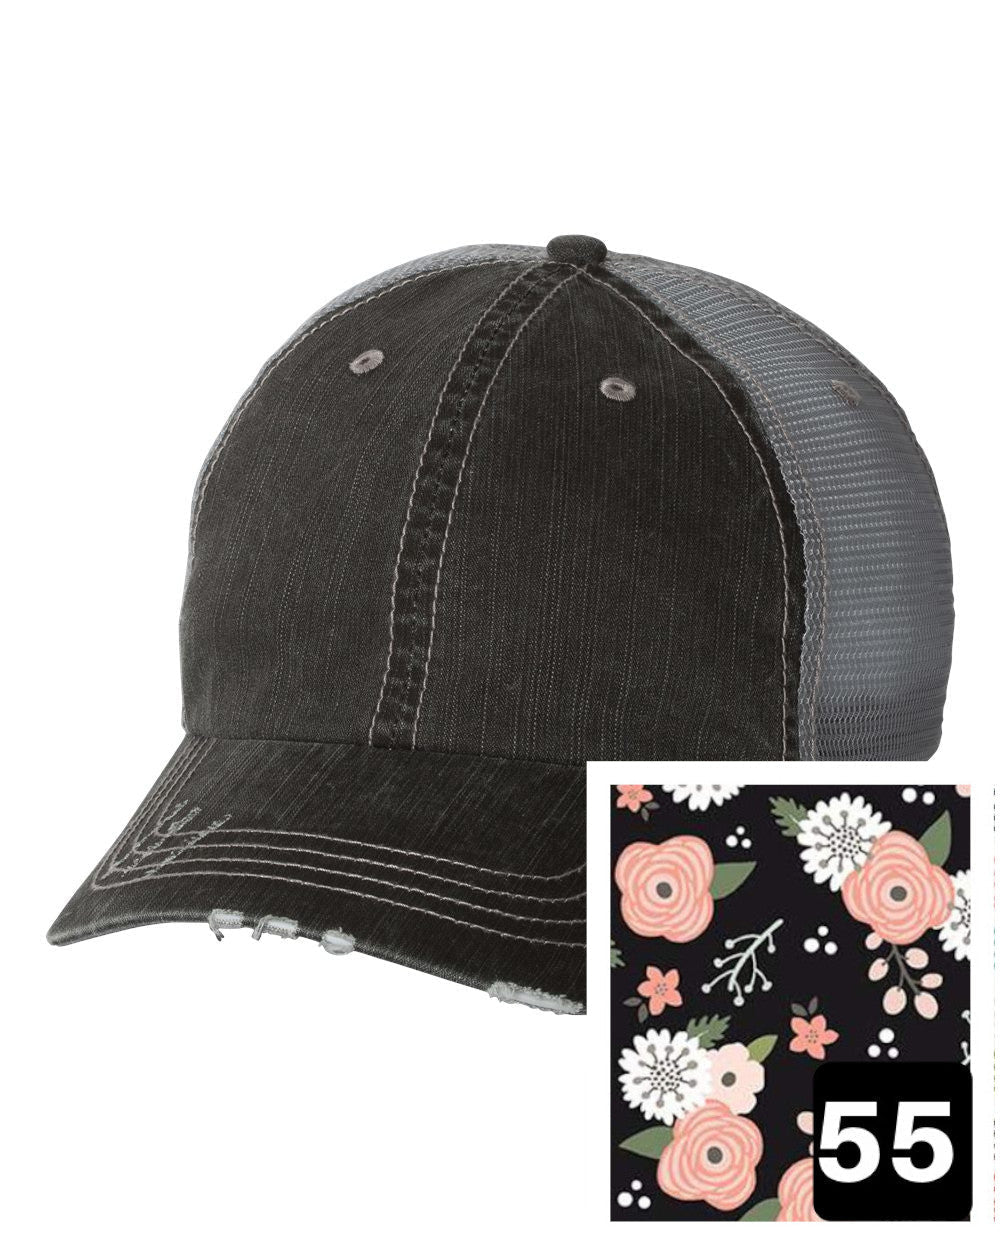 gray distressed trucker hat with petite floral on navy fabric state of Georgia